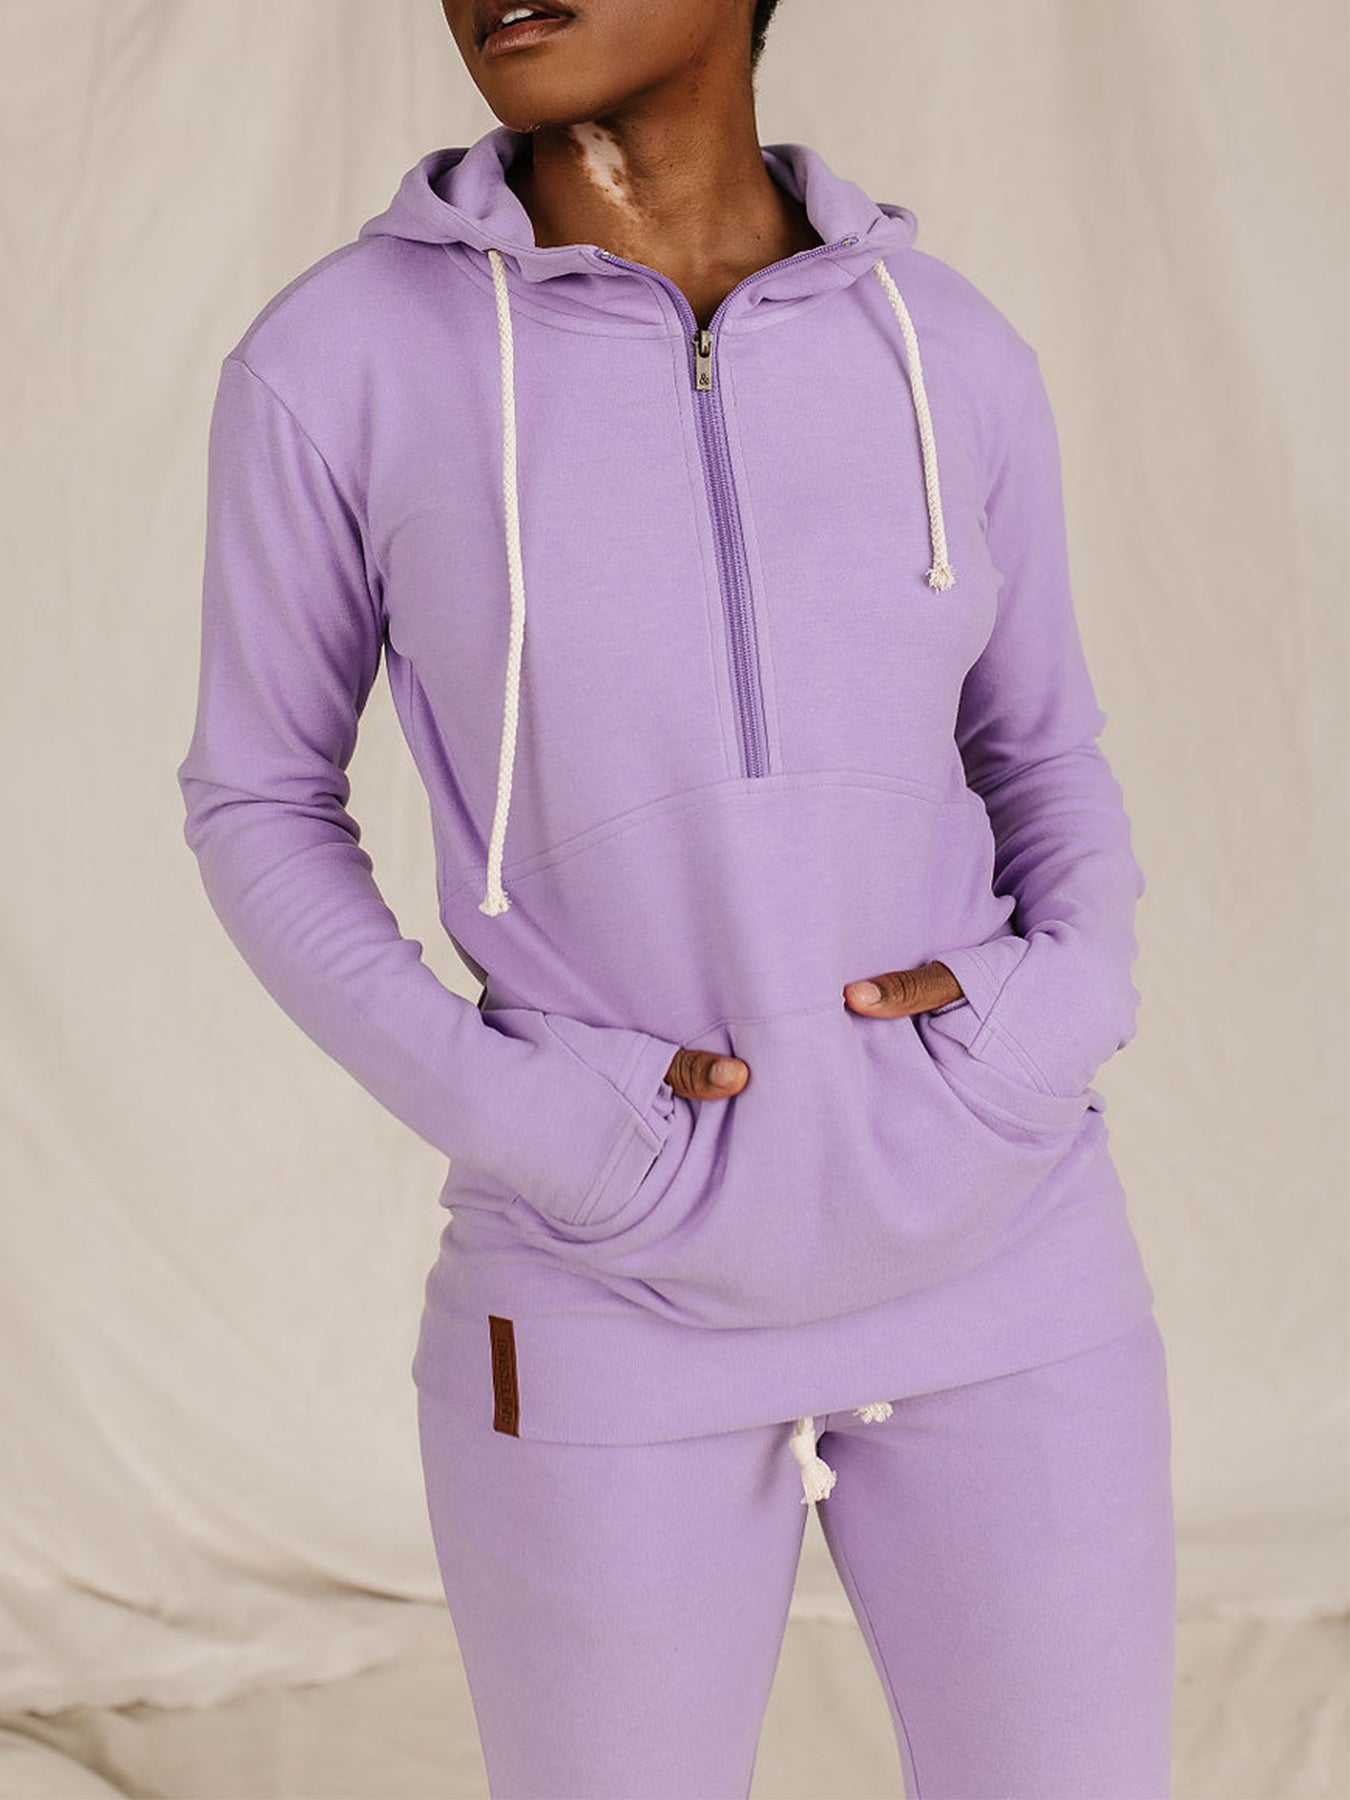 Wisteria Performance Fleece HalfZip by Ampersand Ave